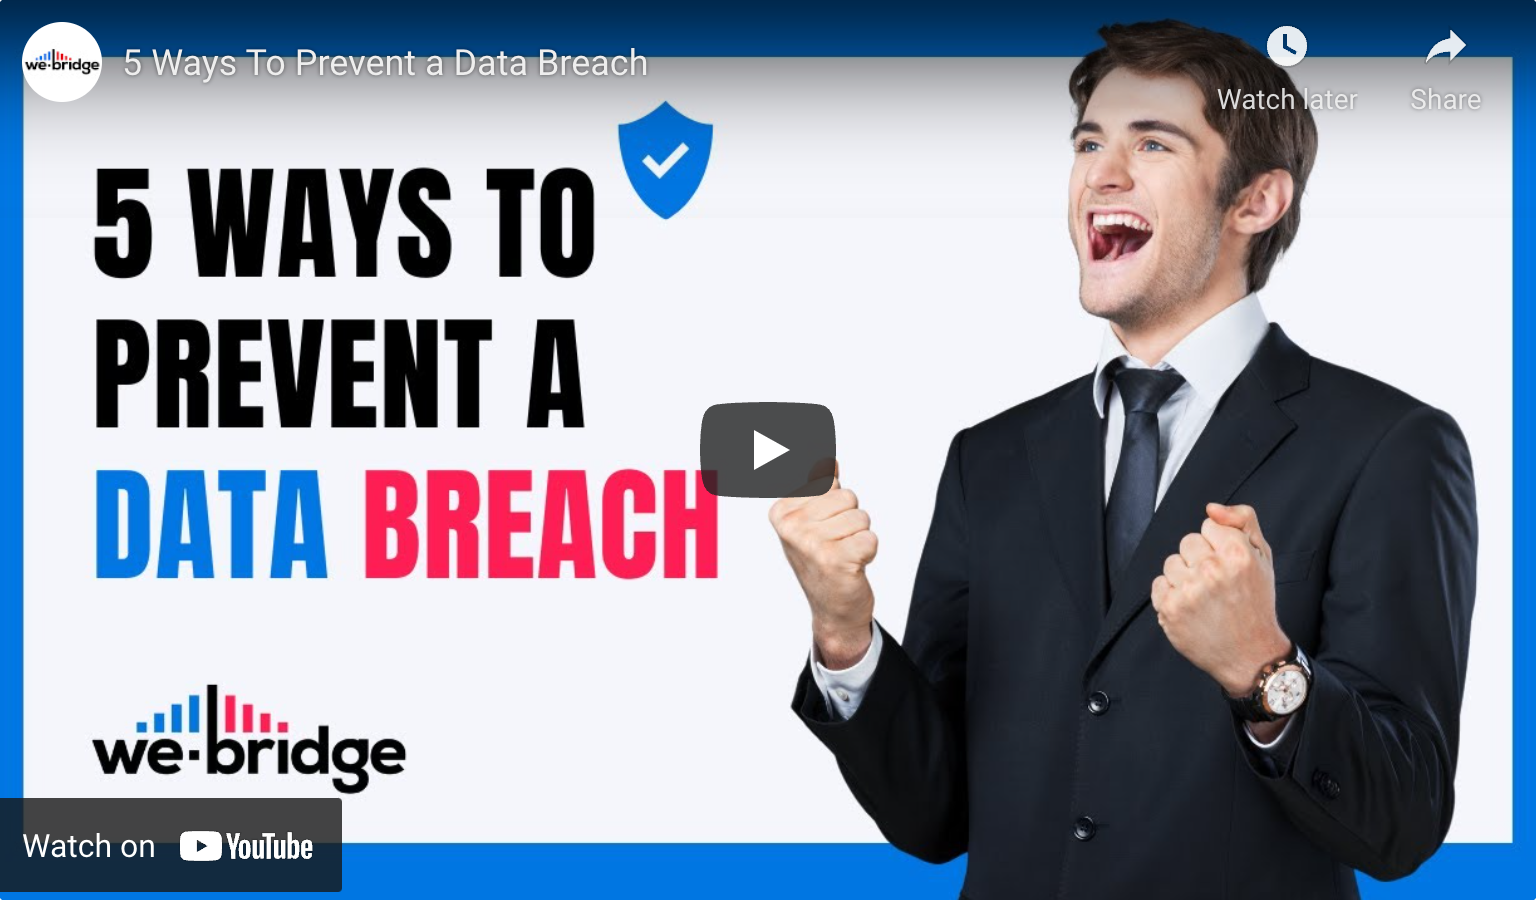 Top 5 Ways To Prevent a Data Breach